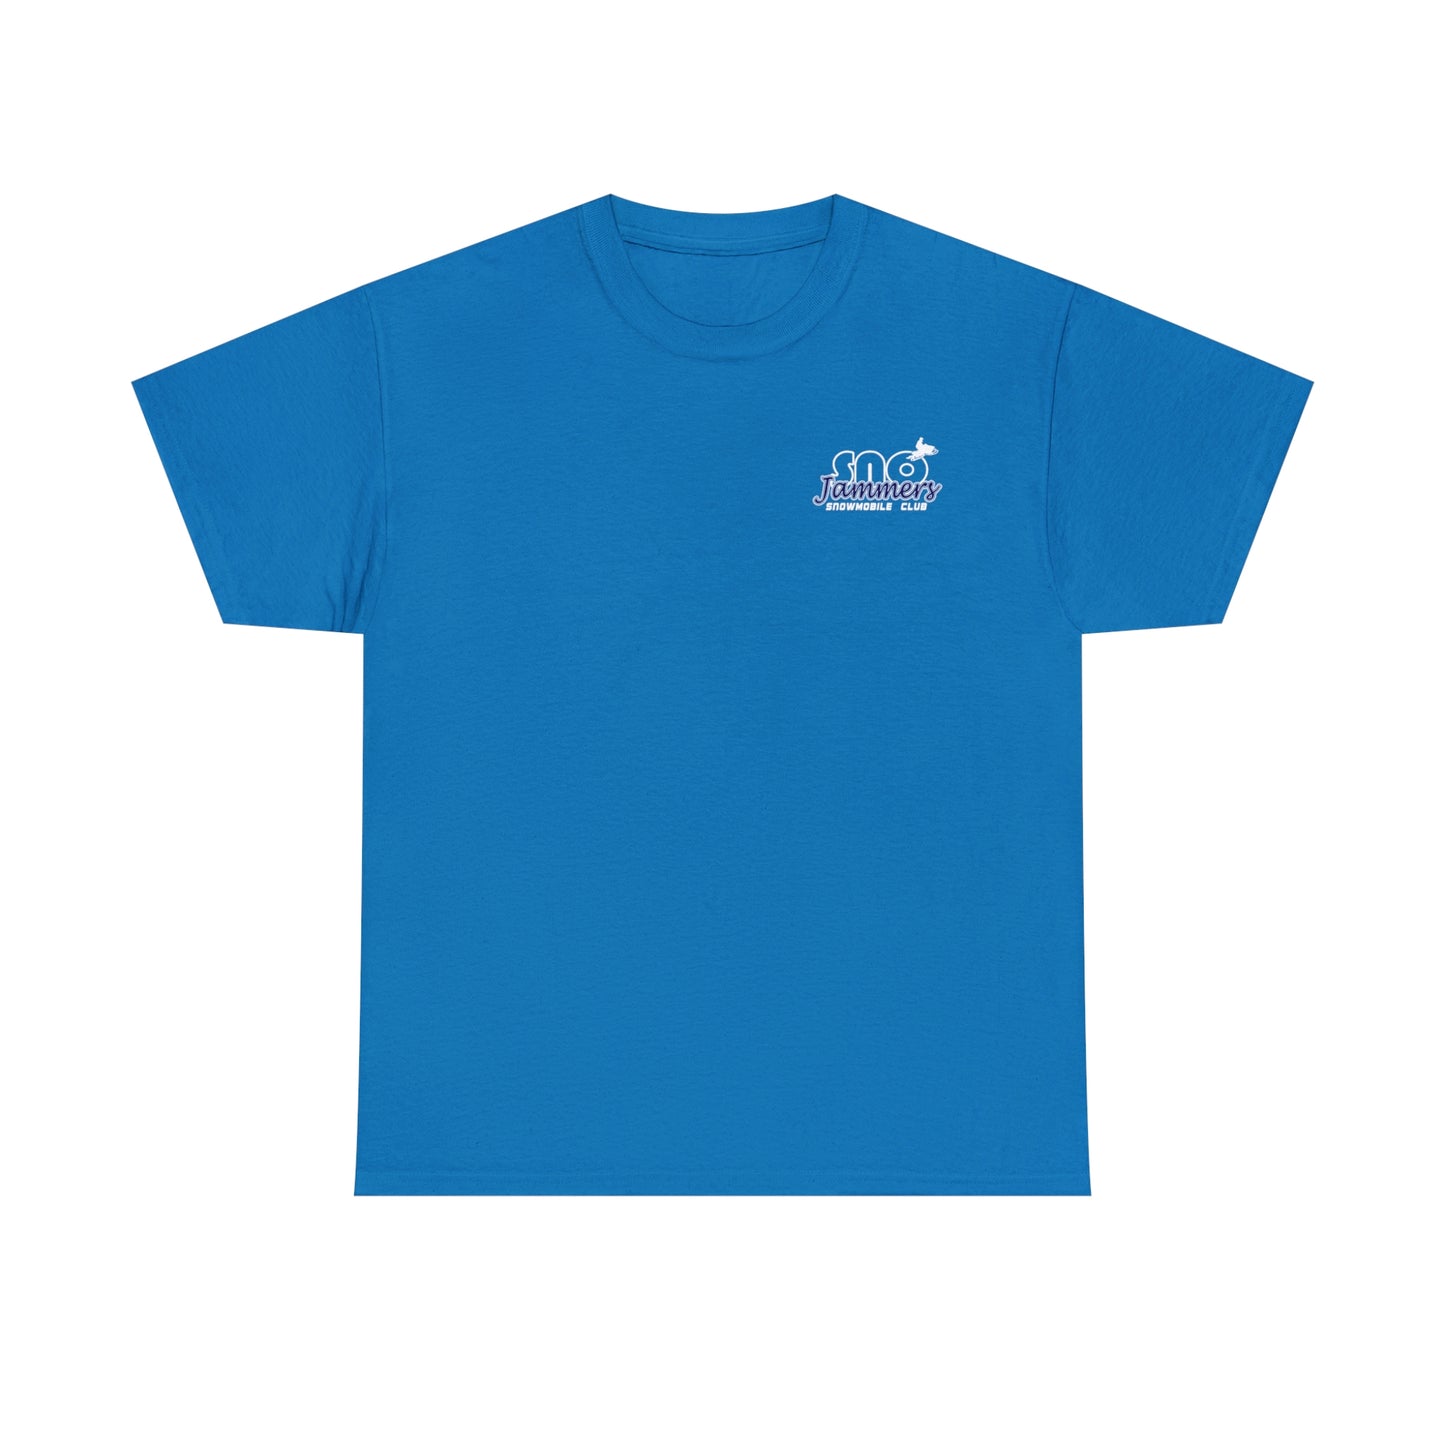 Sno-Jammers Cotton Tee